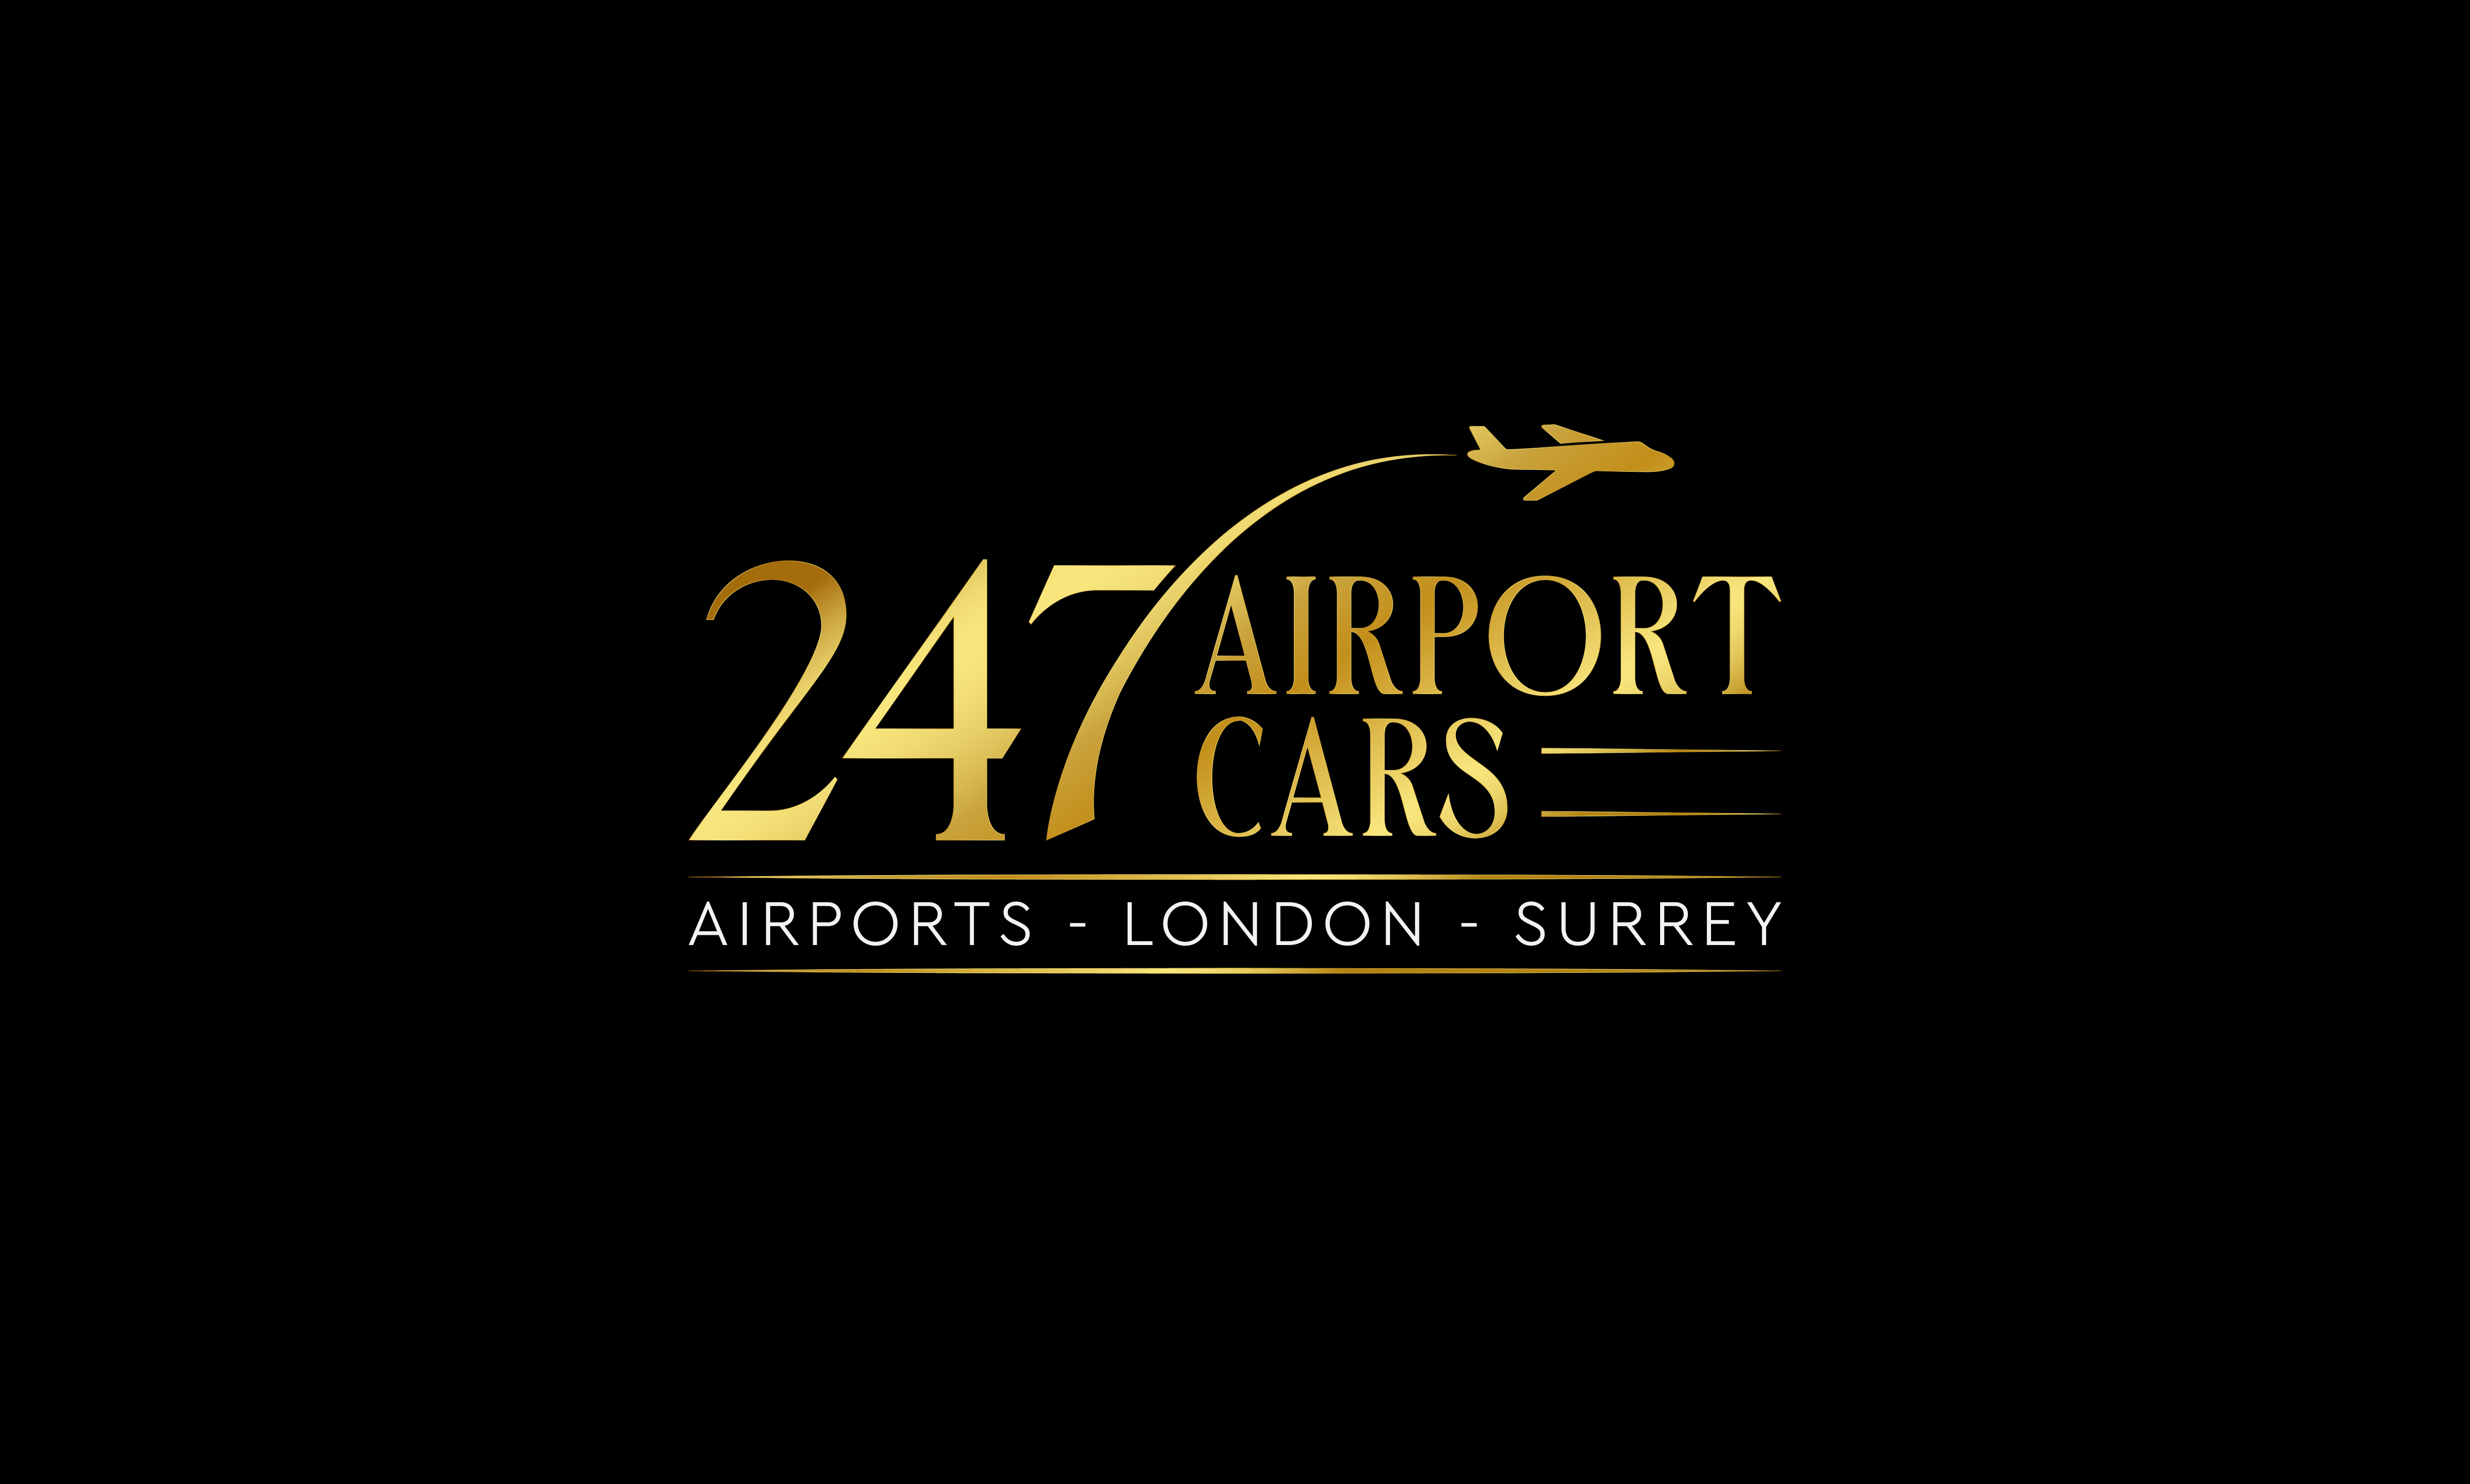 247 Airport Cars